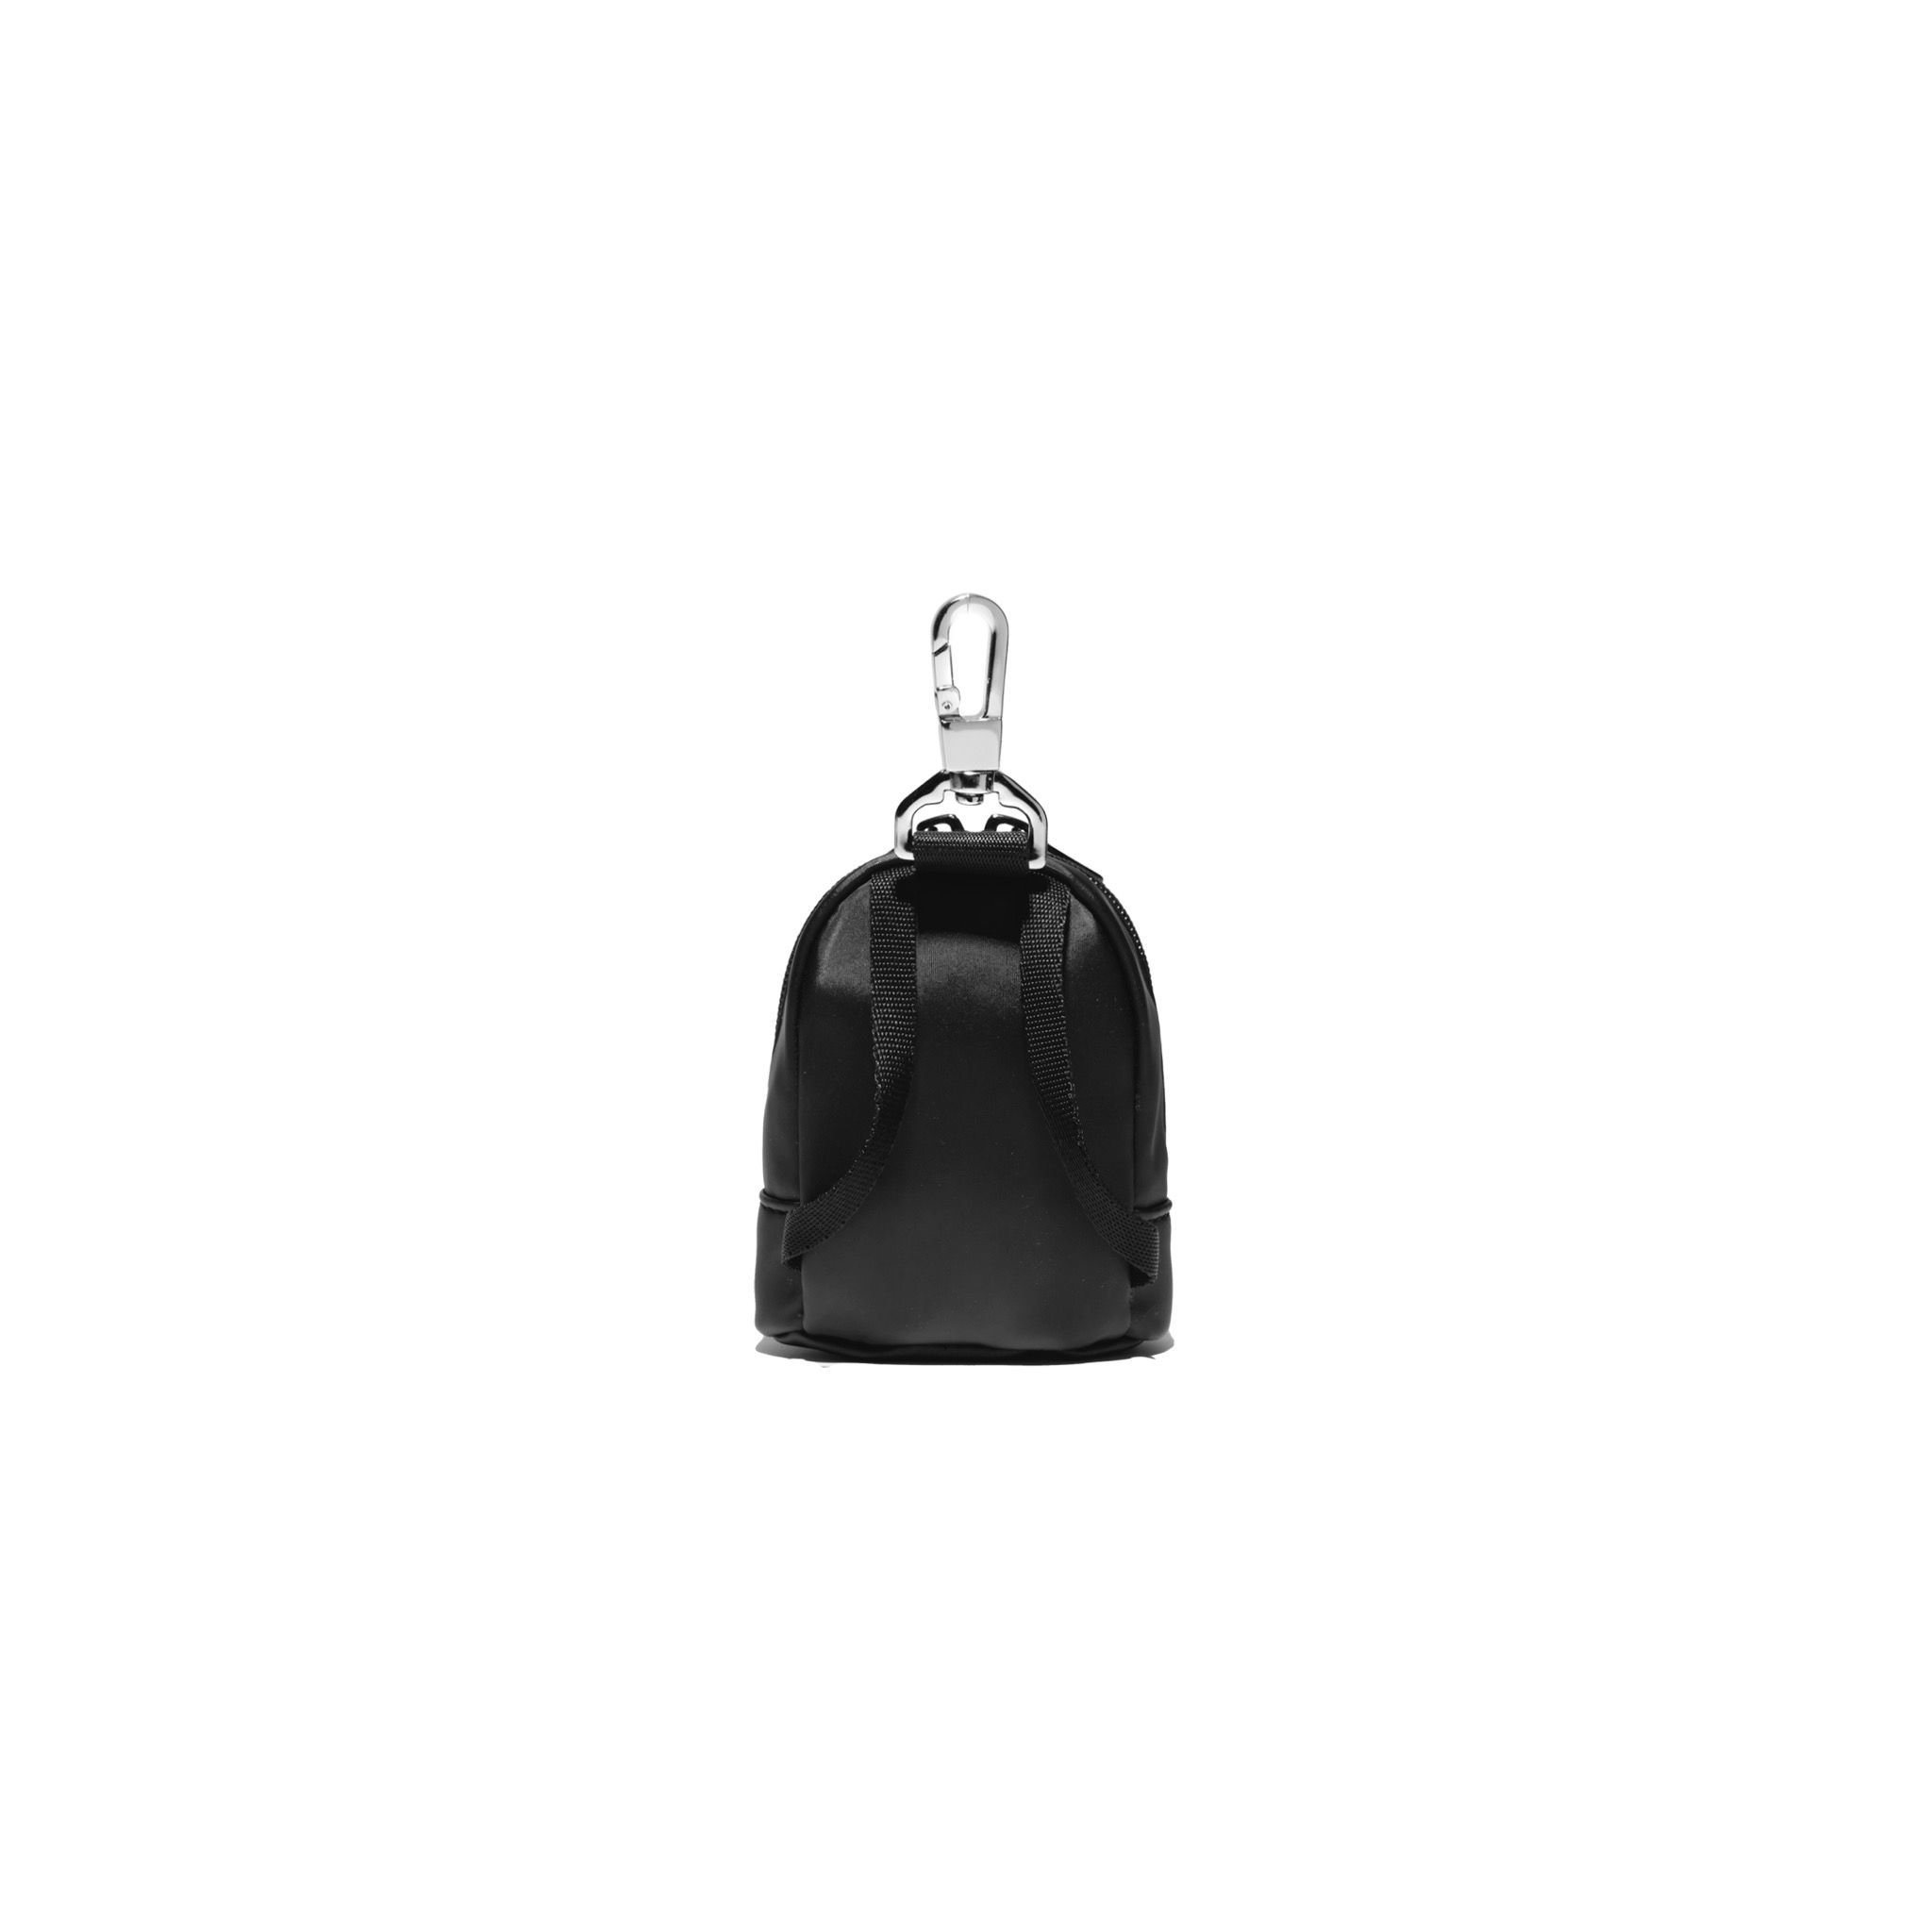  FRONT The Knight Backpack Keychain D922 - Black 